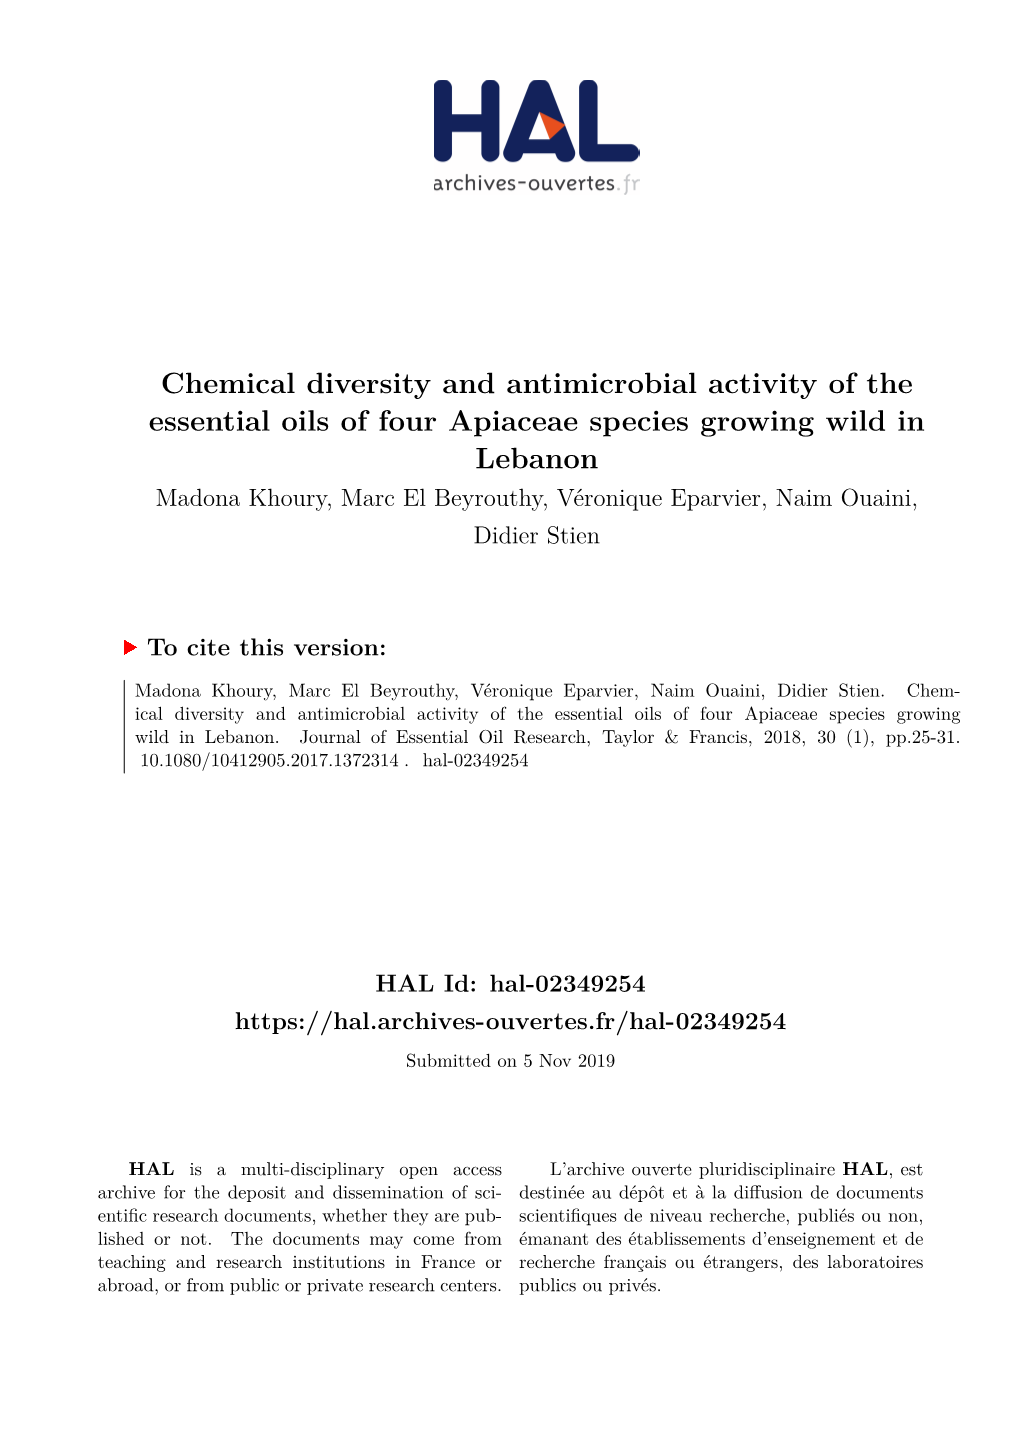 Chemical Diversity and Antimicrobial Activity of the Essential Oils of Four Apiaceae Species Growing Wild in Lebanon